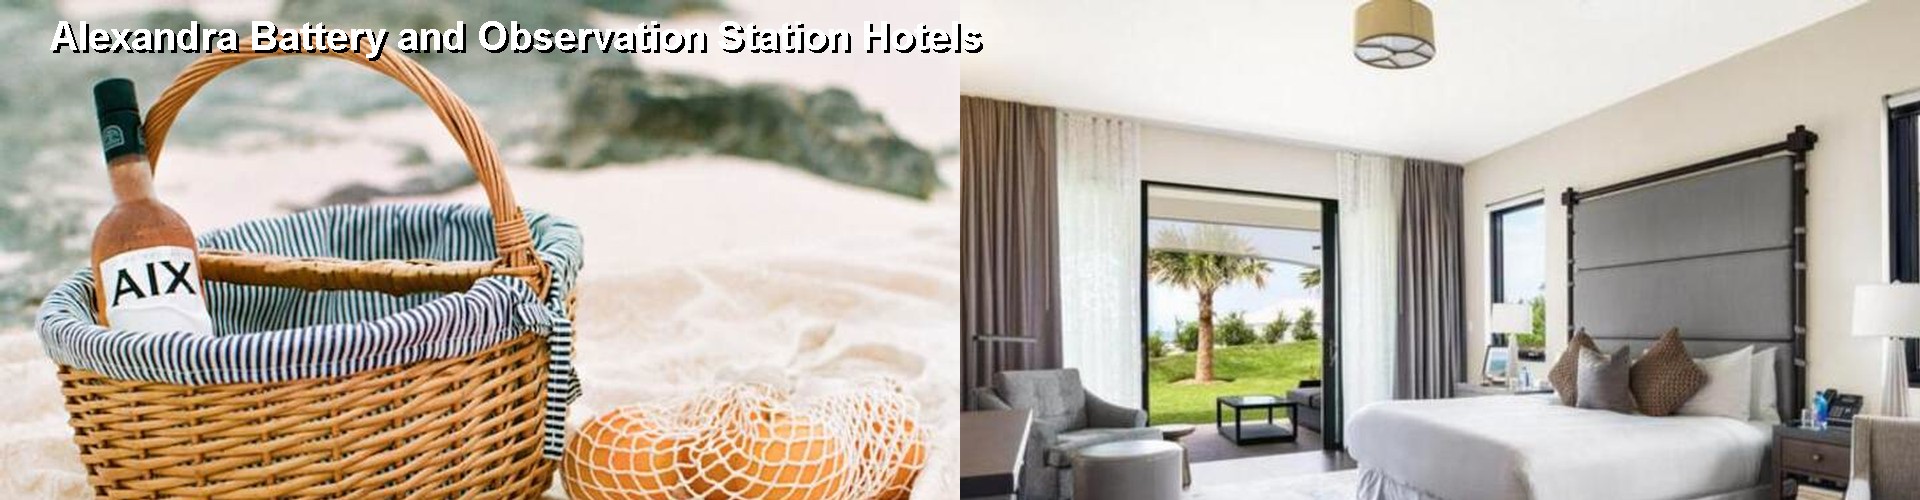 5 Best Hotels near Alexandra Battery and Observation Station